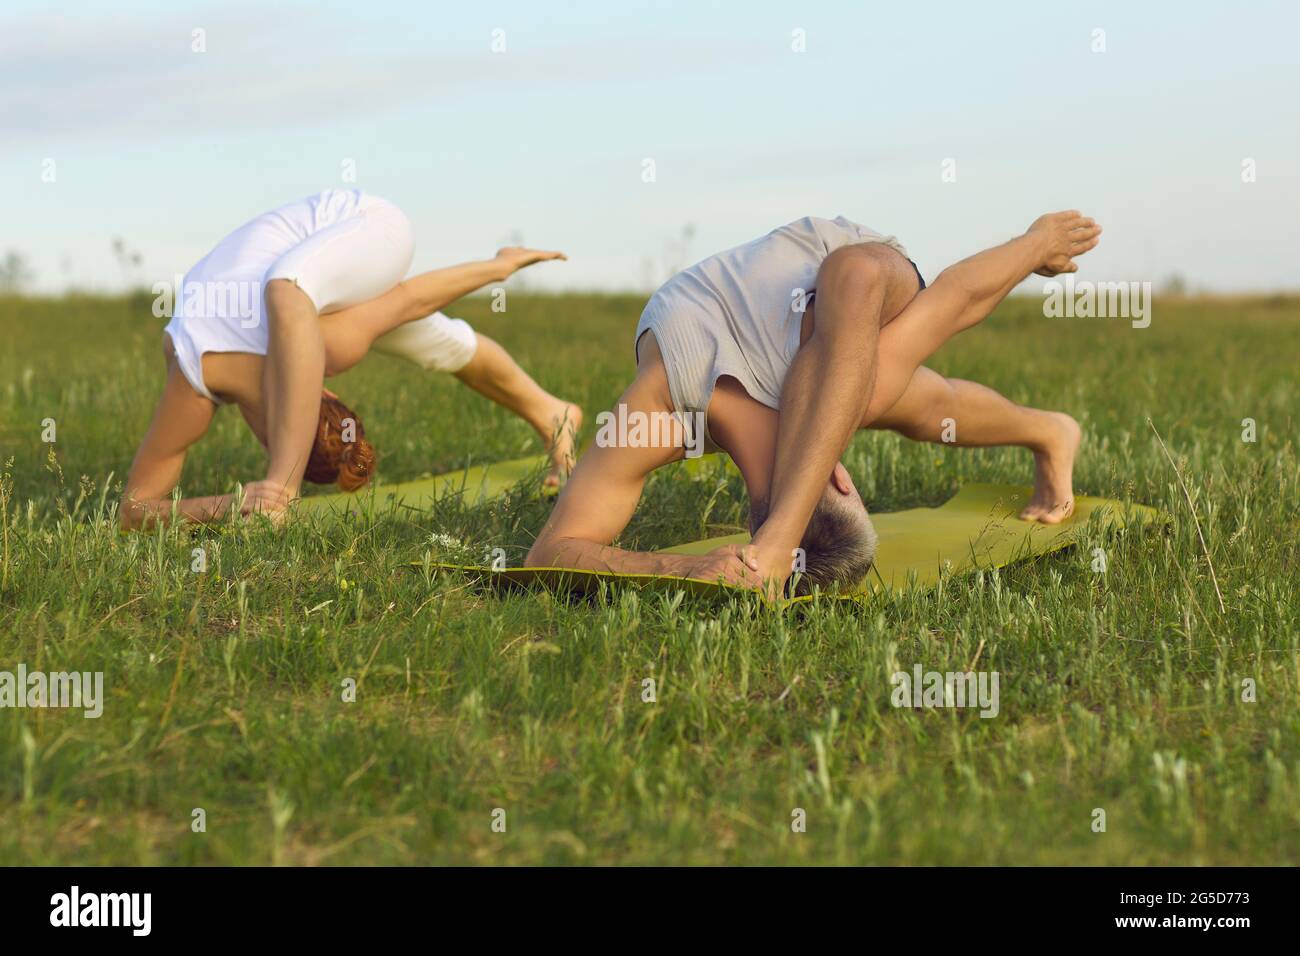 Man and woman doing complicated bending yoga exercises on green grass of summer field Stock Photo